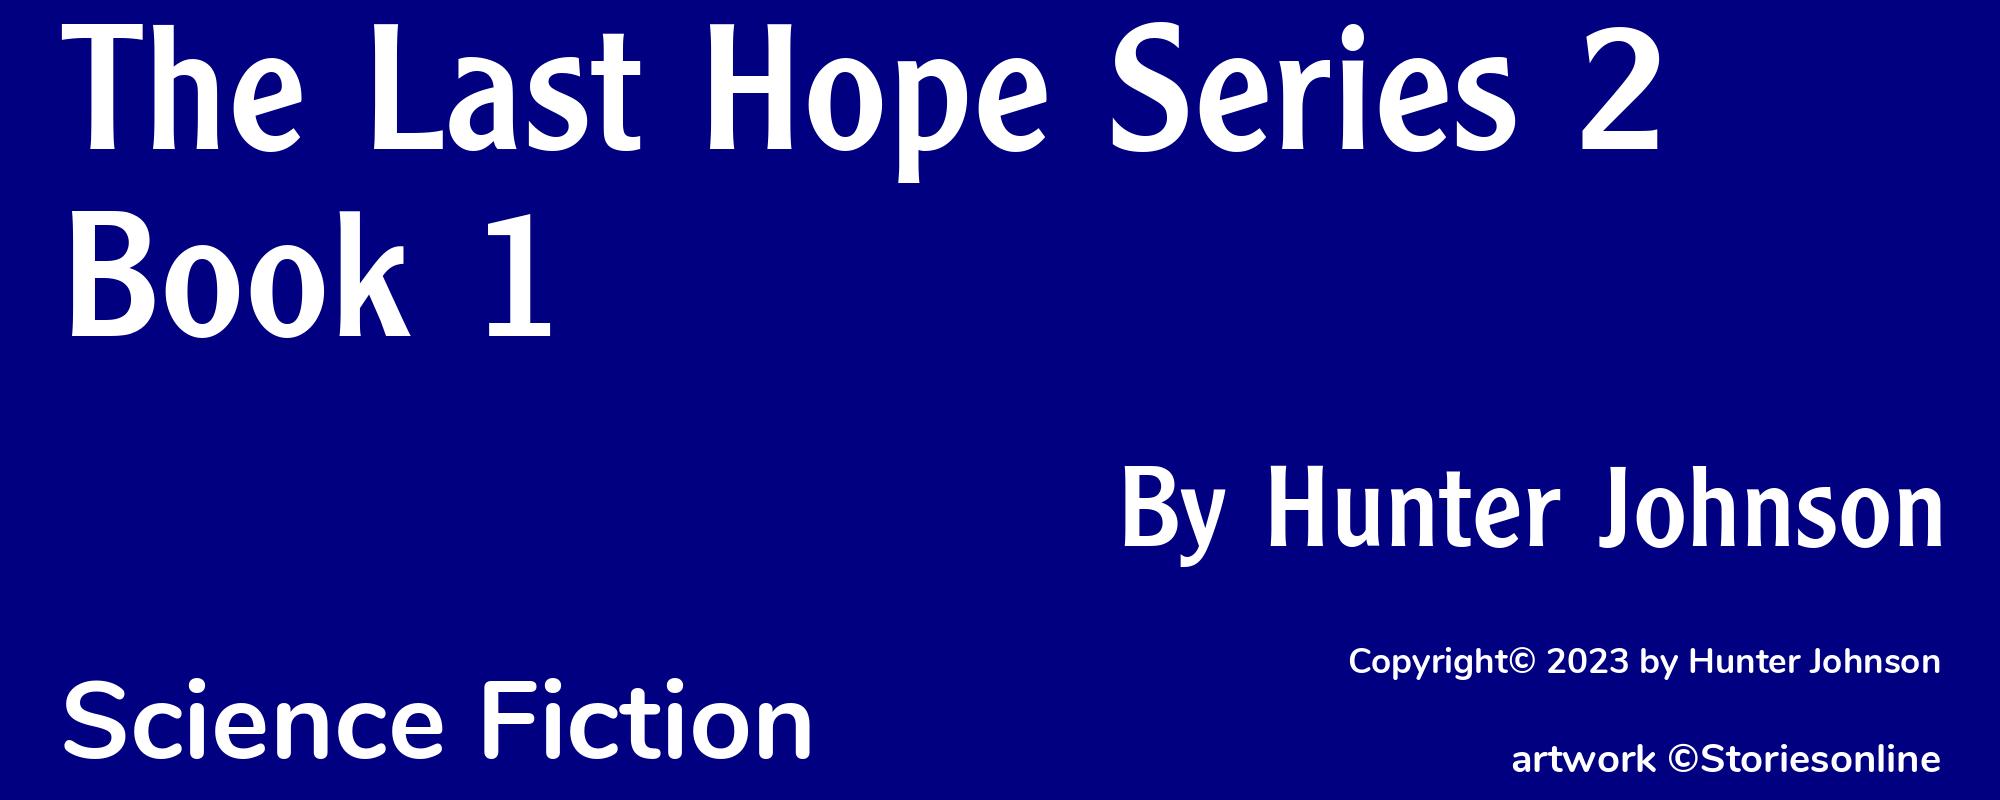 The Last Hope Series 2 Book 1 - Cover